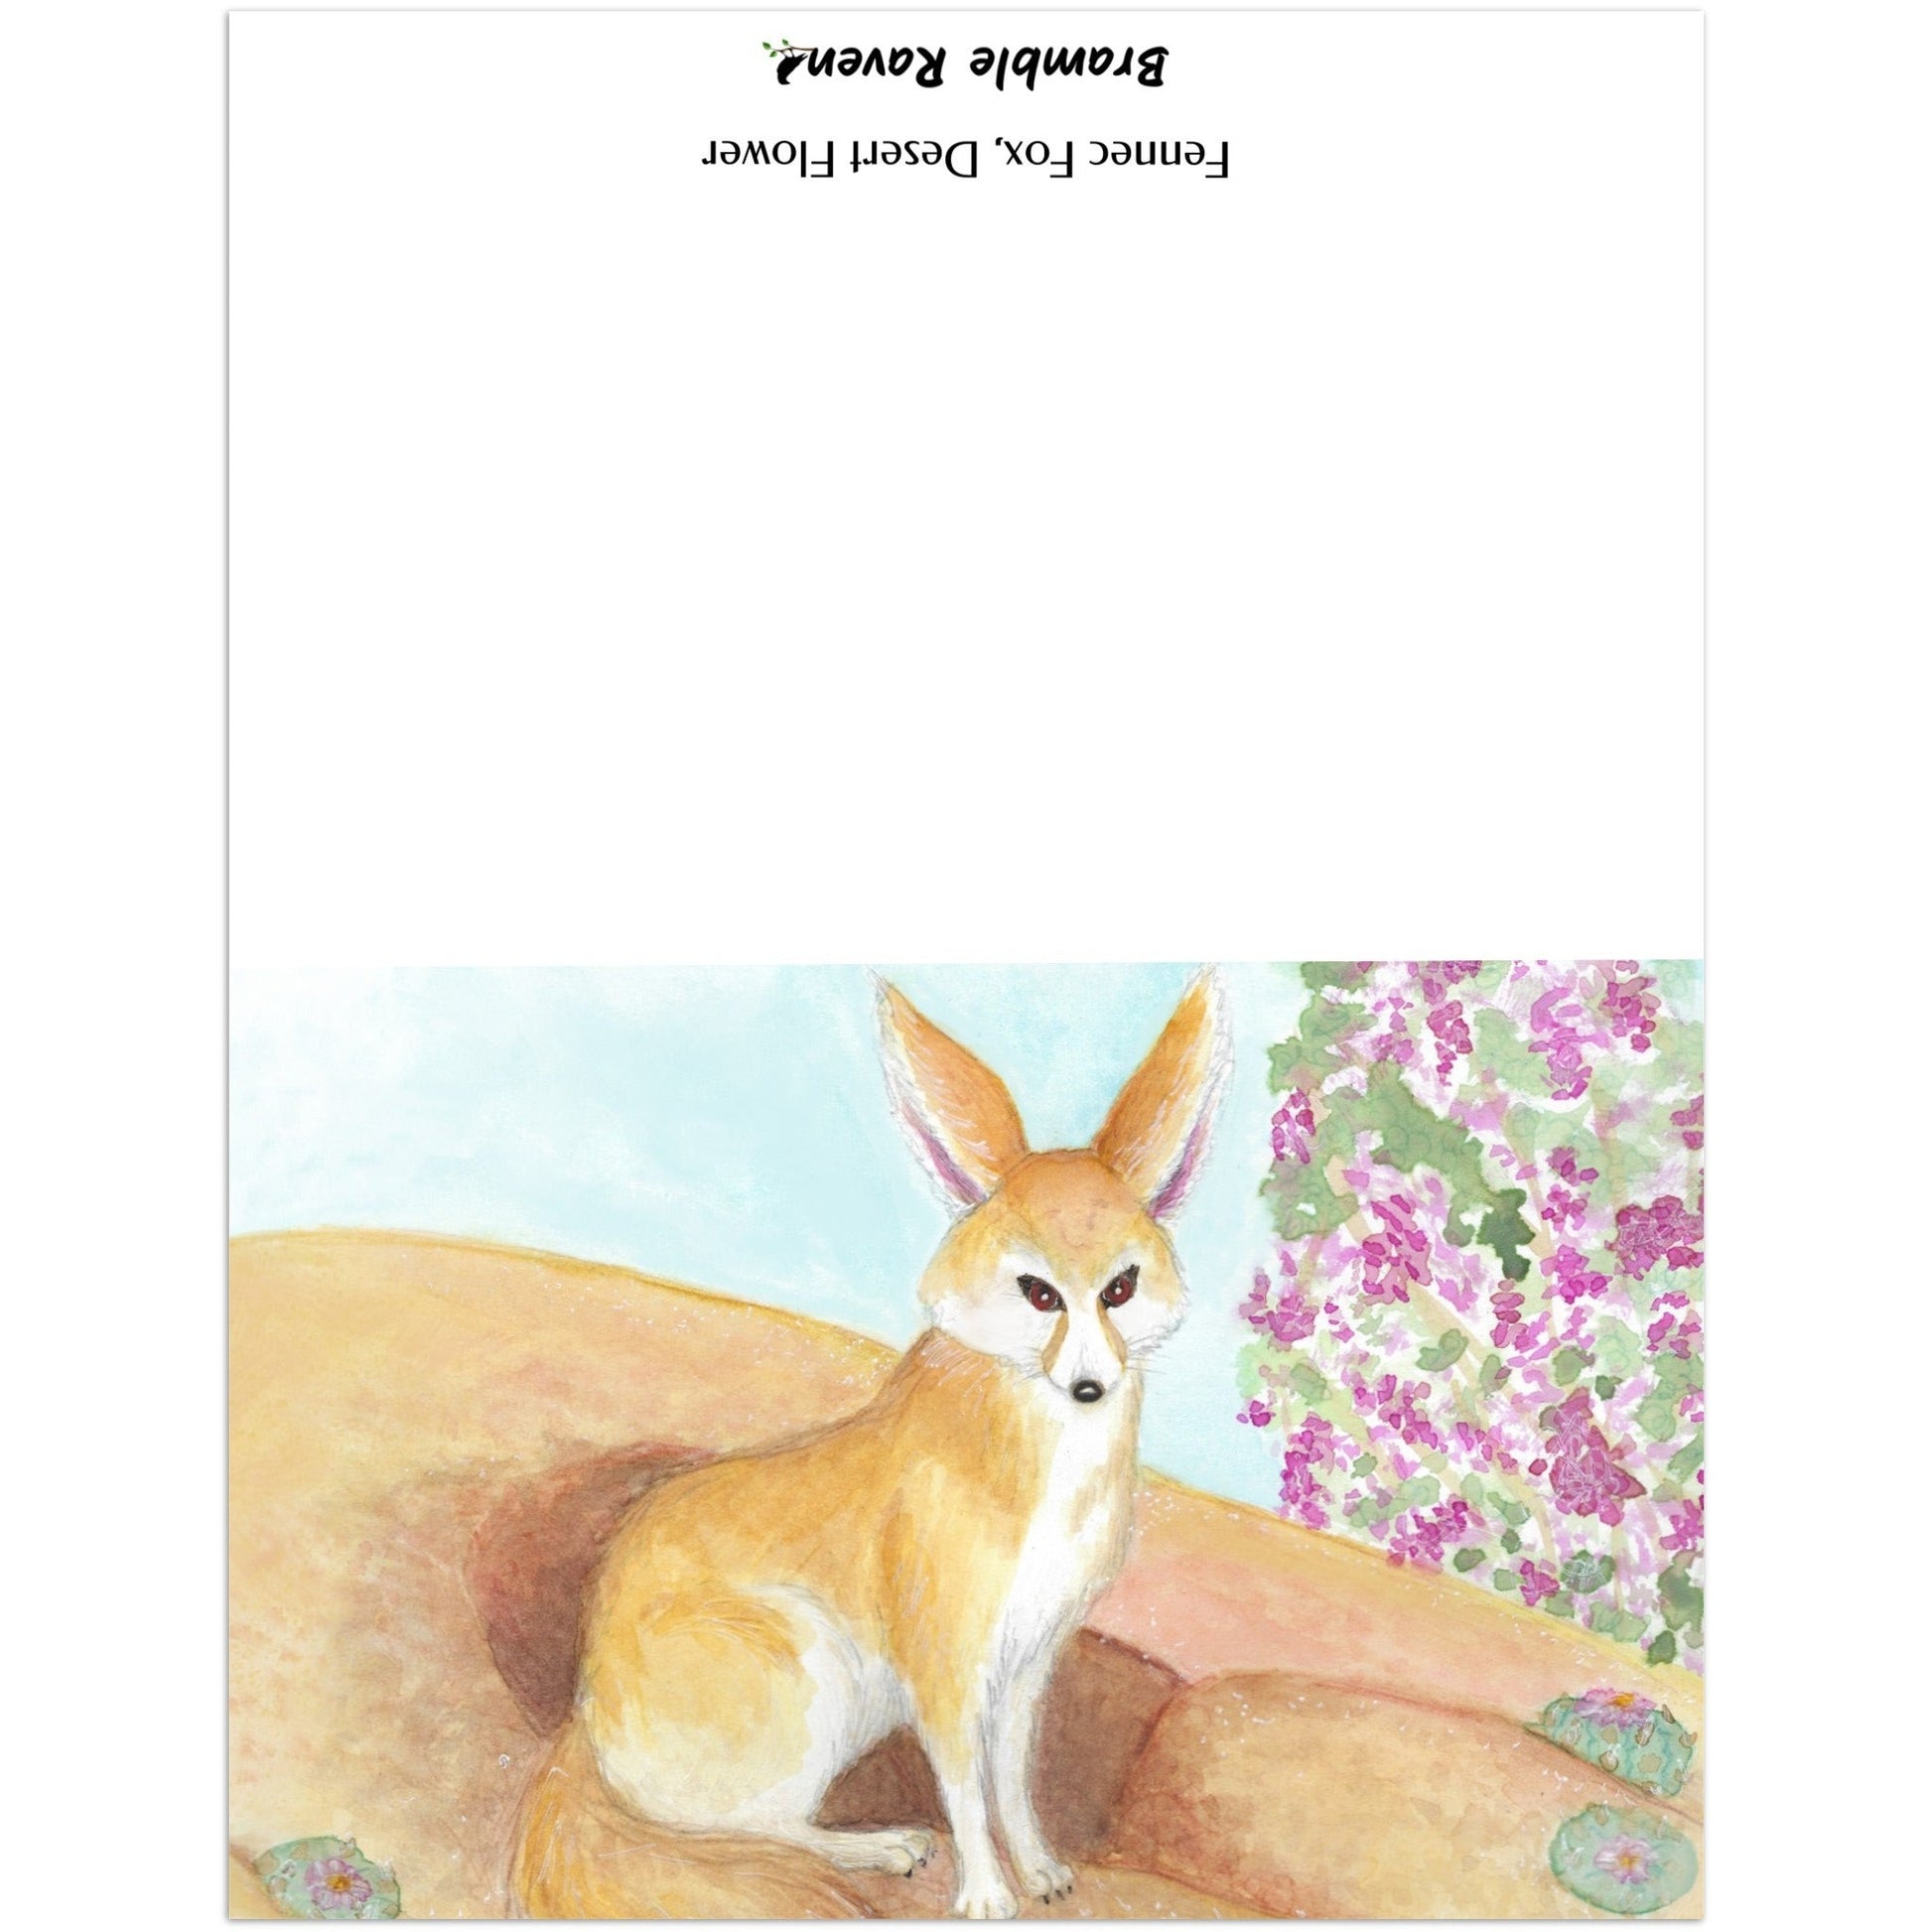 Pack of ten 5.5 x 8.5 inch greeting cards. Features watercolor print of fennec fox near it's den in the desert by a jacaranda tree on the front. Inside is blank. Made of coated paperboard. Comes with envelopes.